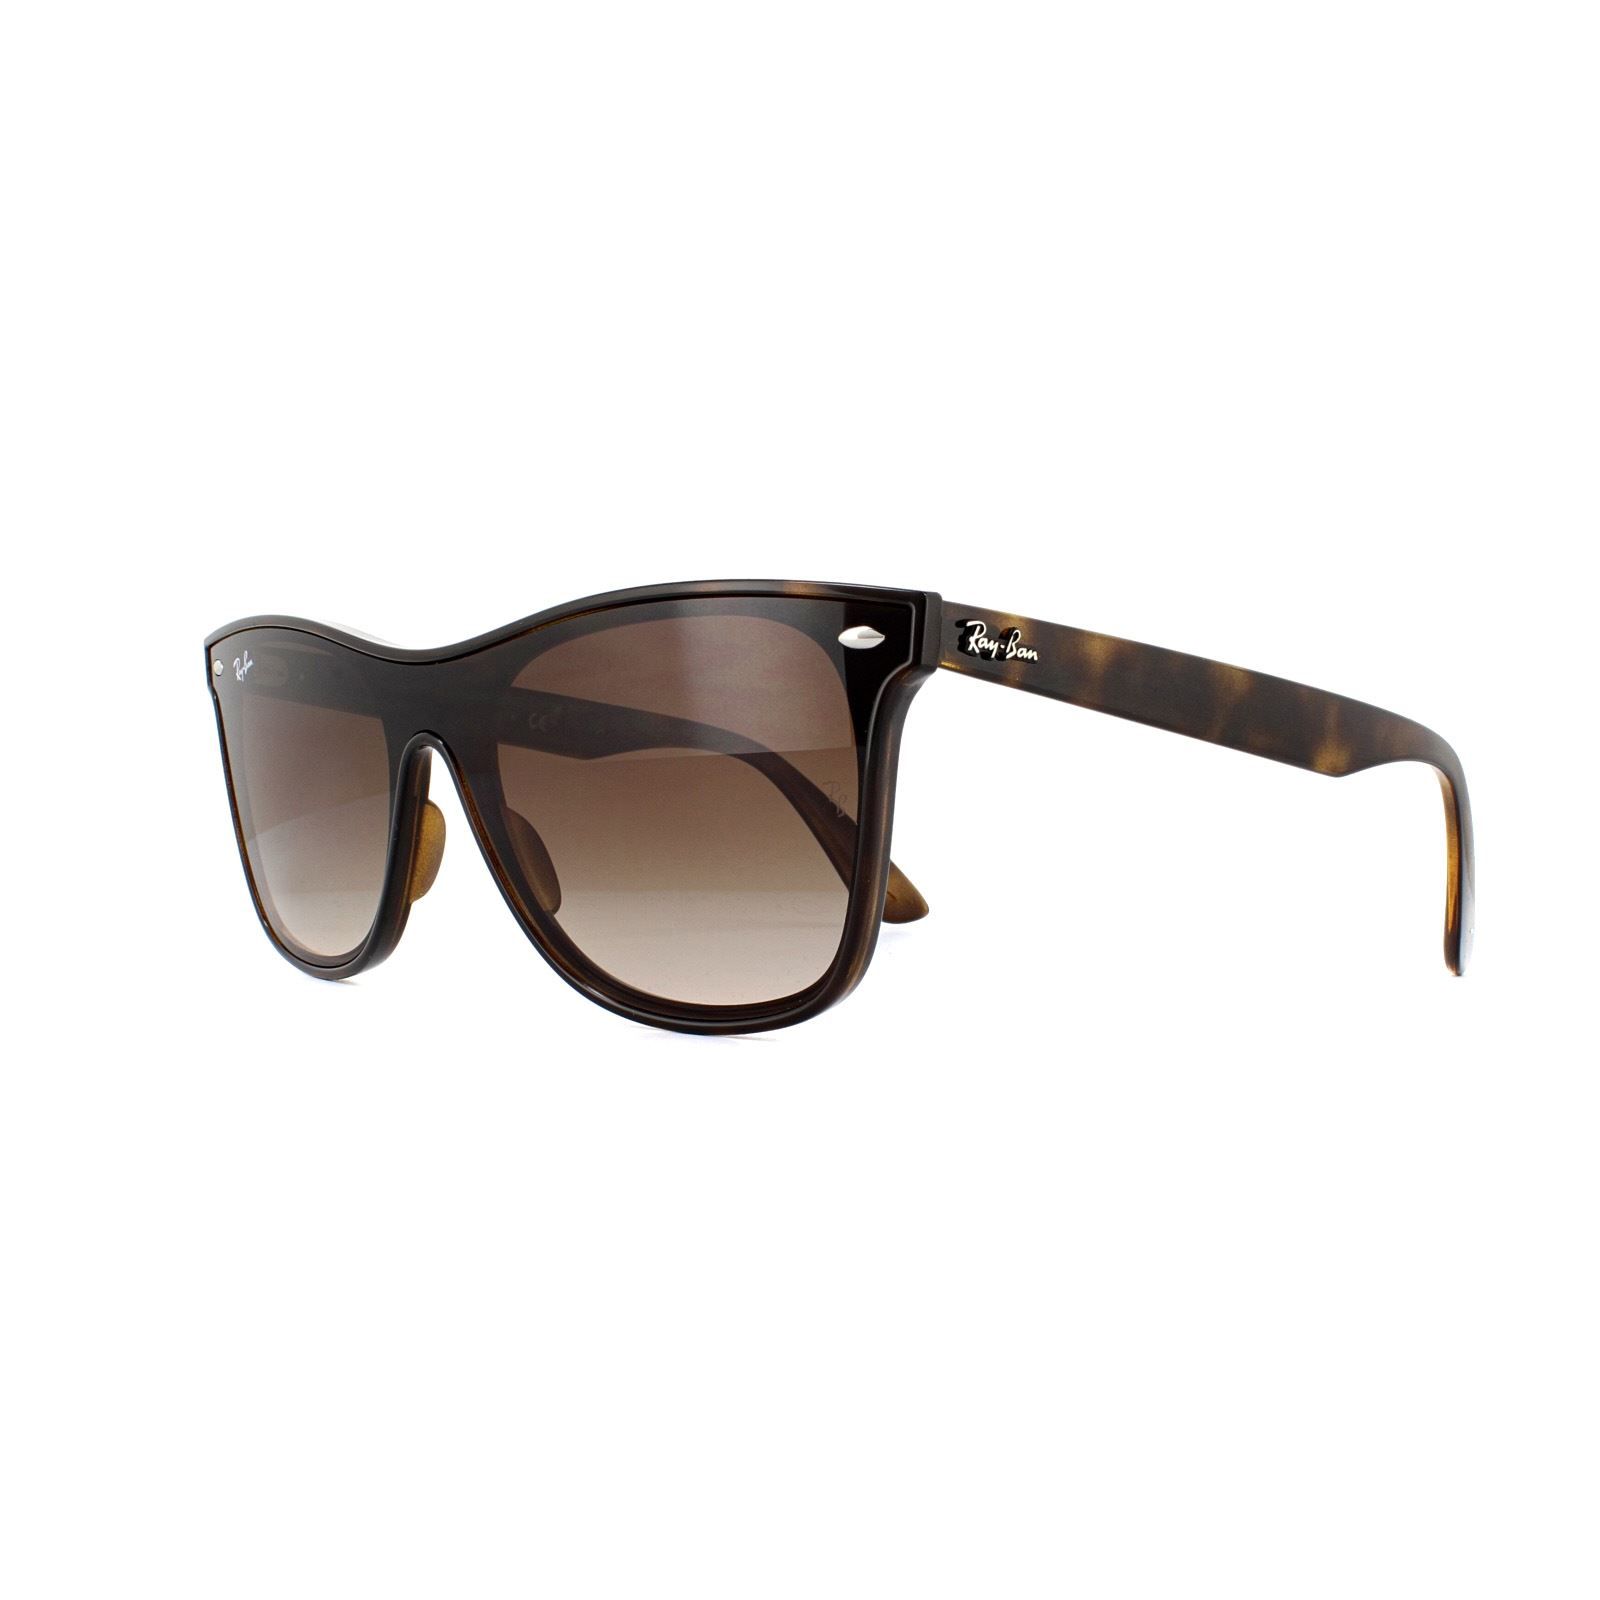 Ray-Ban Sunglasses Blaze Wayfarer 4440N 710/13 Light Havana Brown Gradient are a lens-over-frame version of the iconic wayfarer style in the latest Blaze collection of futuristic versions of modern classics.